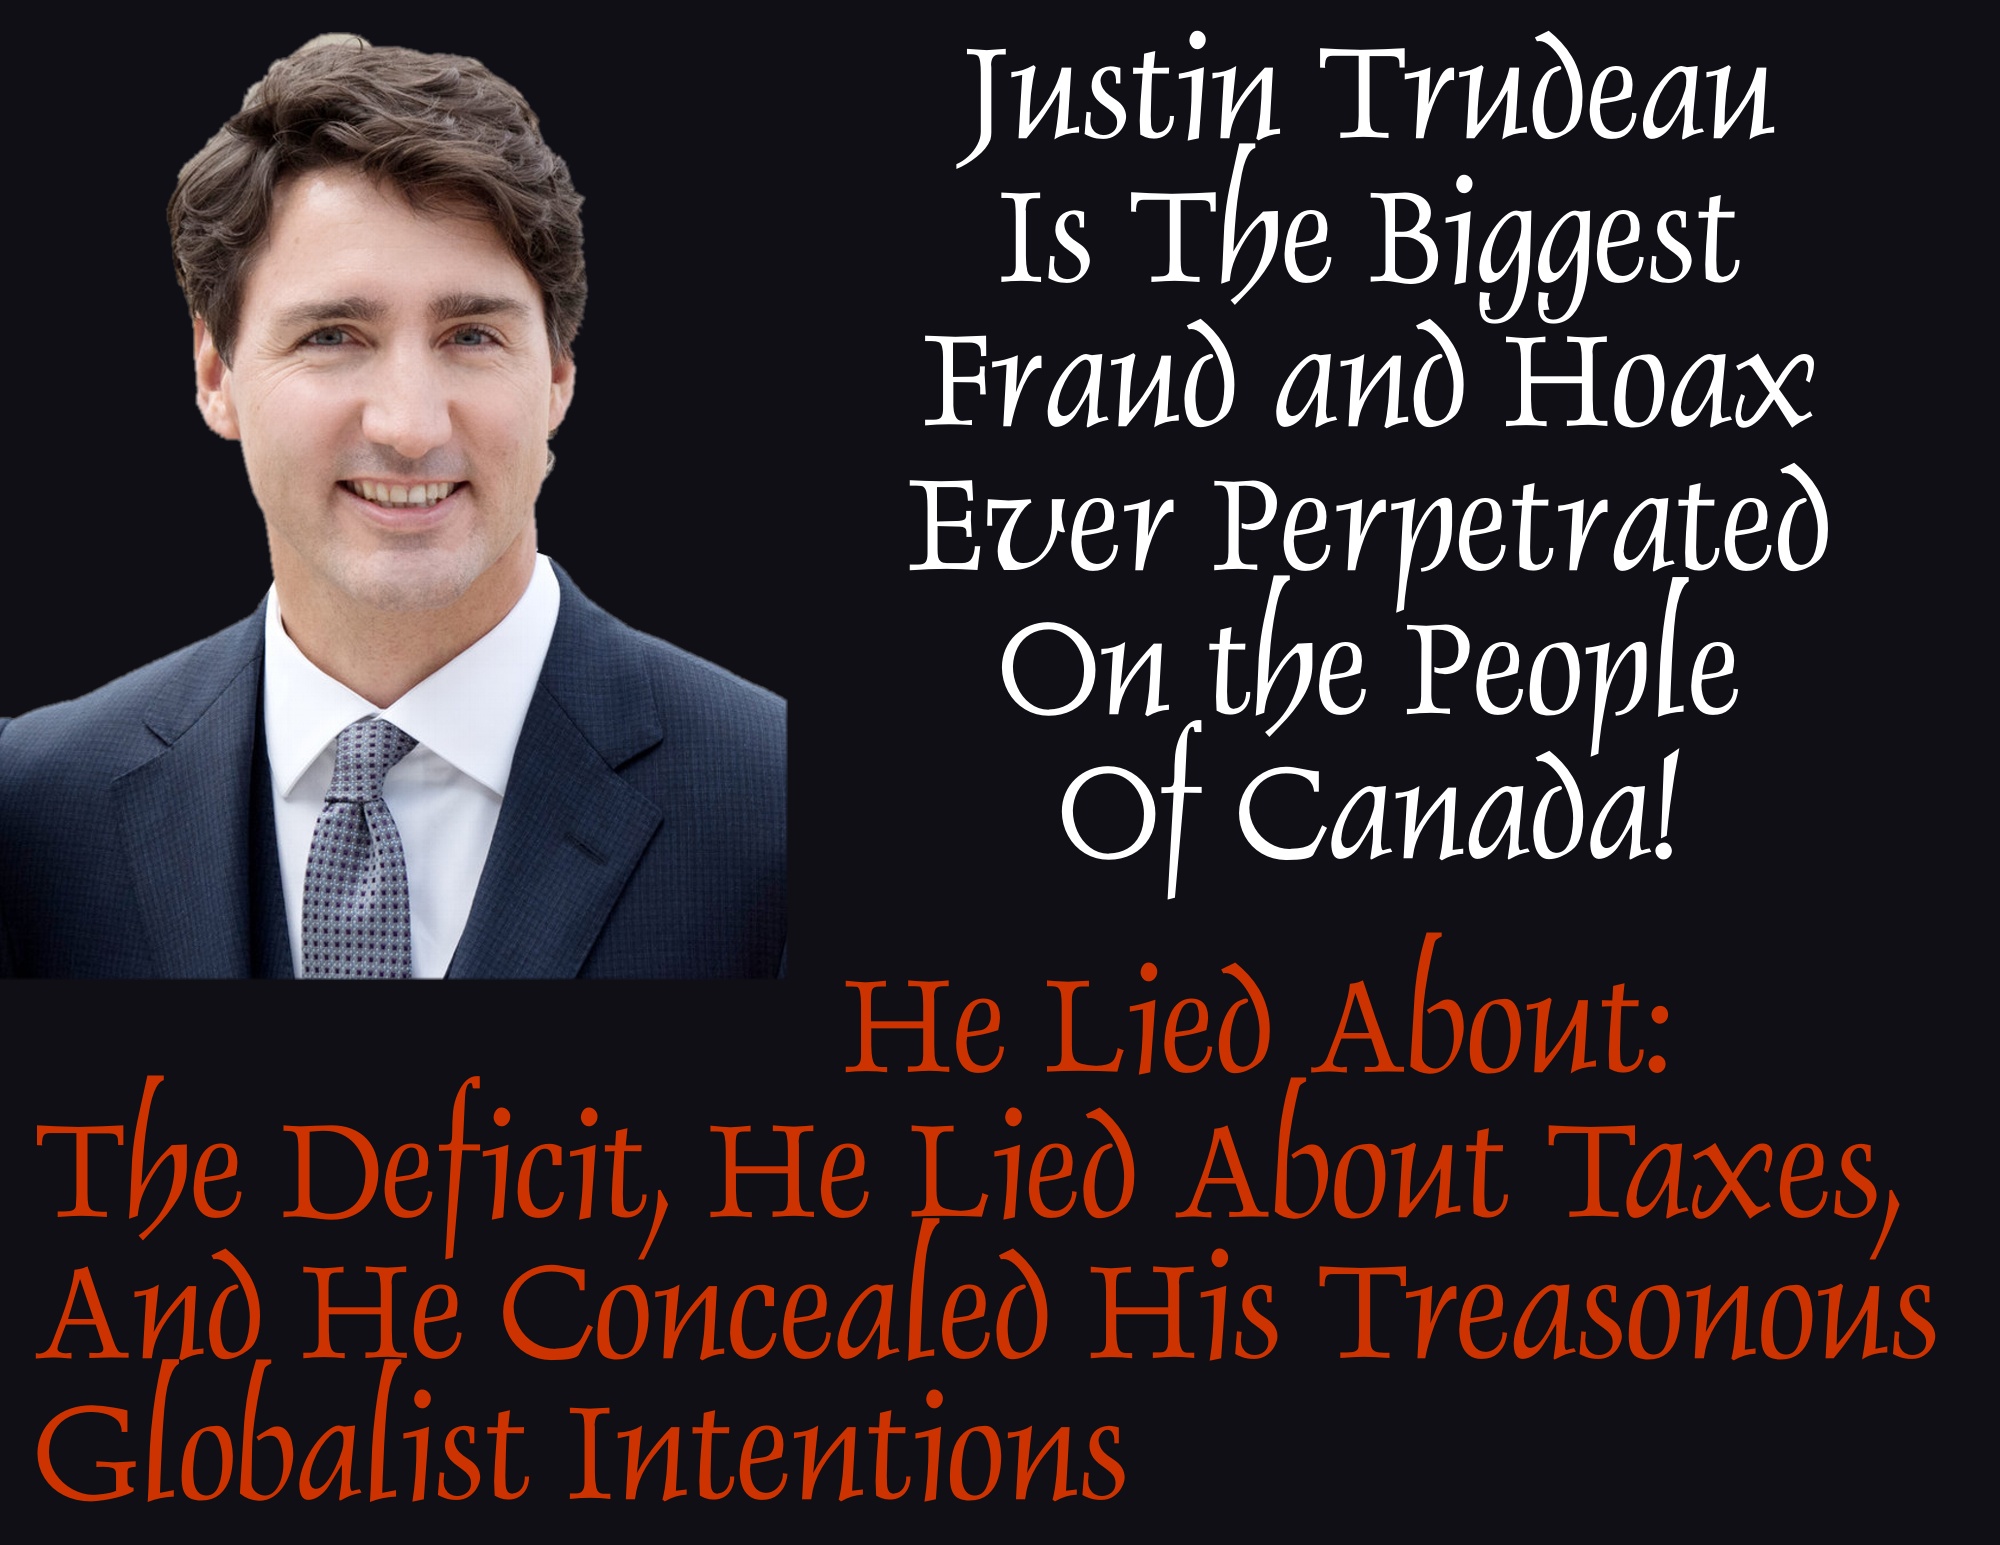 Justin Trudeau Lied About The Deficit, He Lied About Taxes, And He Concealed His Treasonous Globalist Intentions